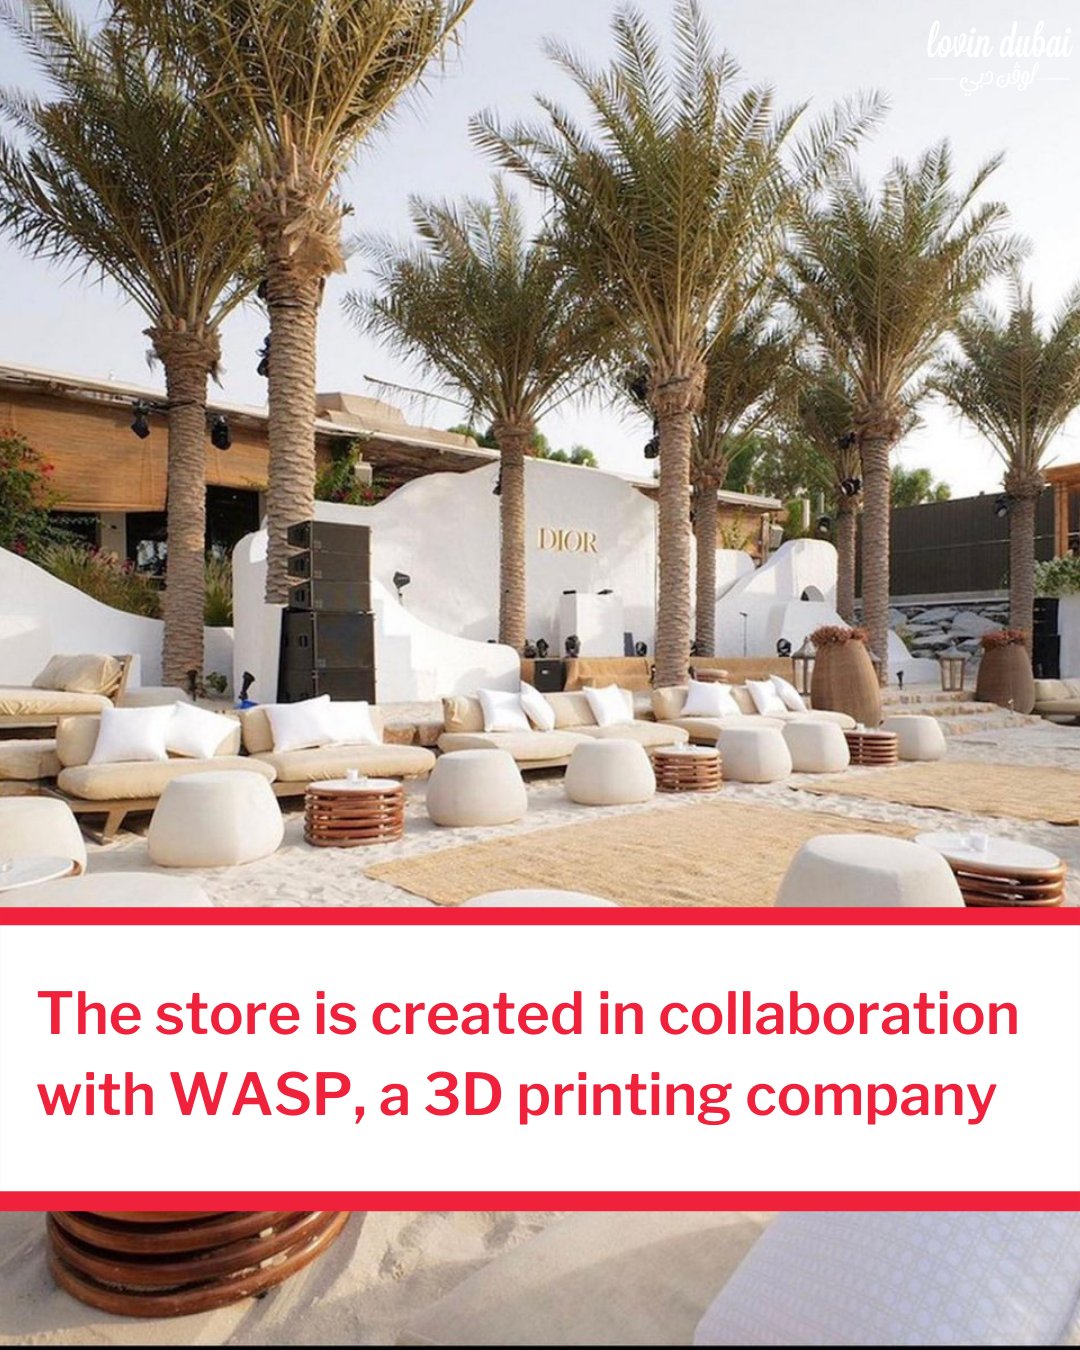 A 3D printed pop-up store by WASP for Dior